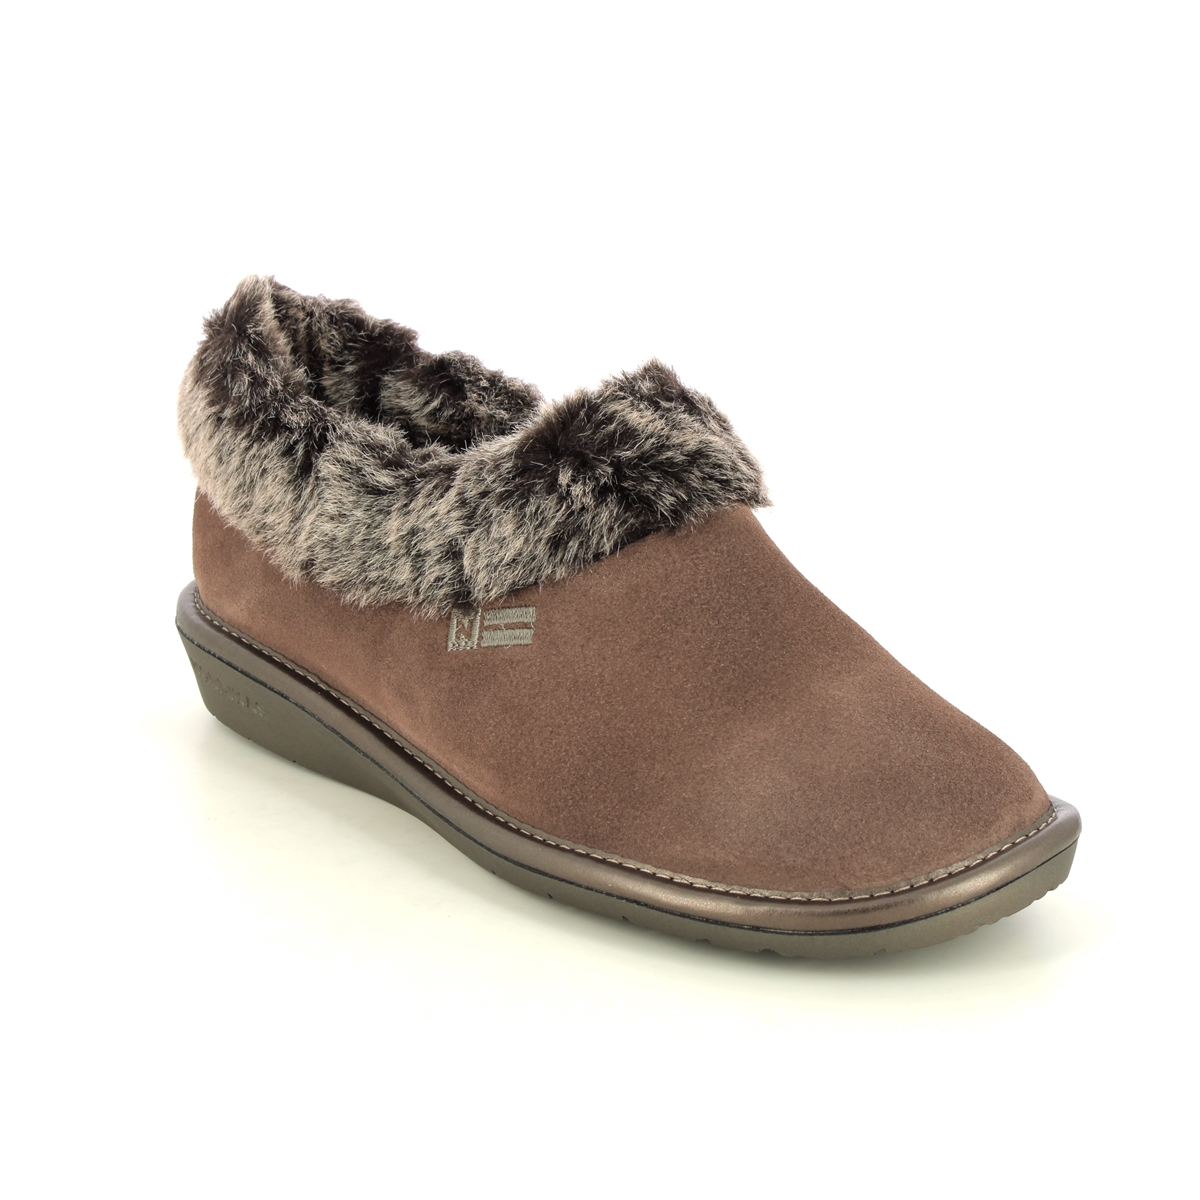 Nordikas Toasty Fur Taupe Suede Womens Slippers 1358-53 In Size 39 In Plain Taupe Suede